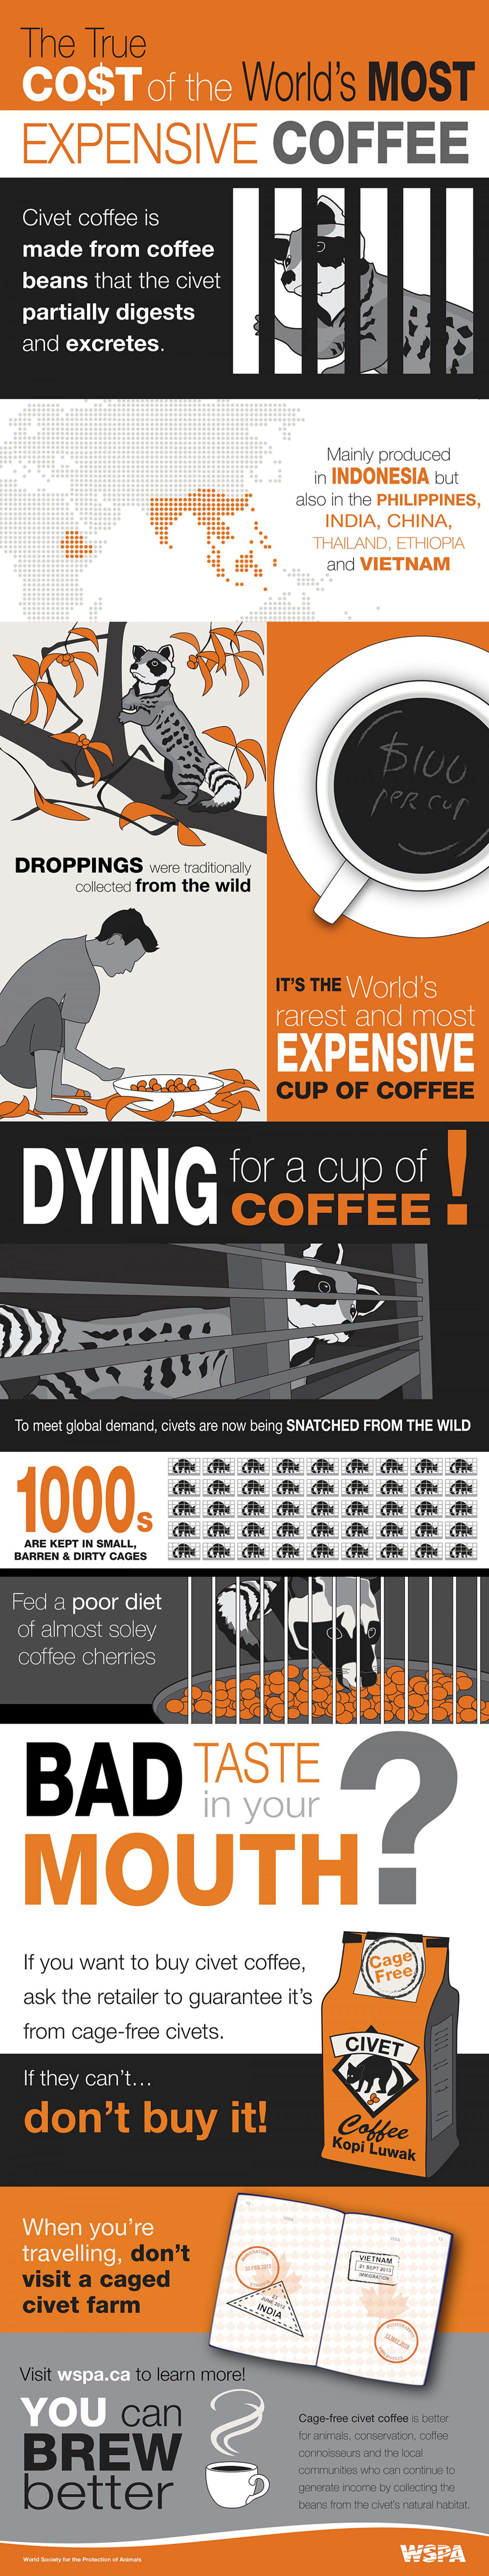 The true cost of the world's most expensive coffee Infographic